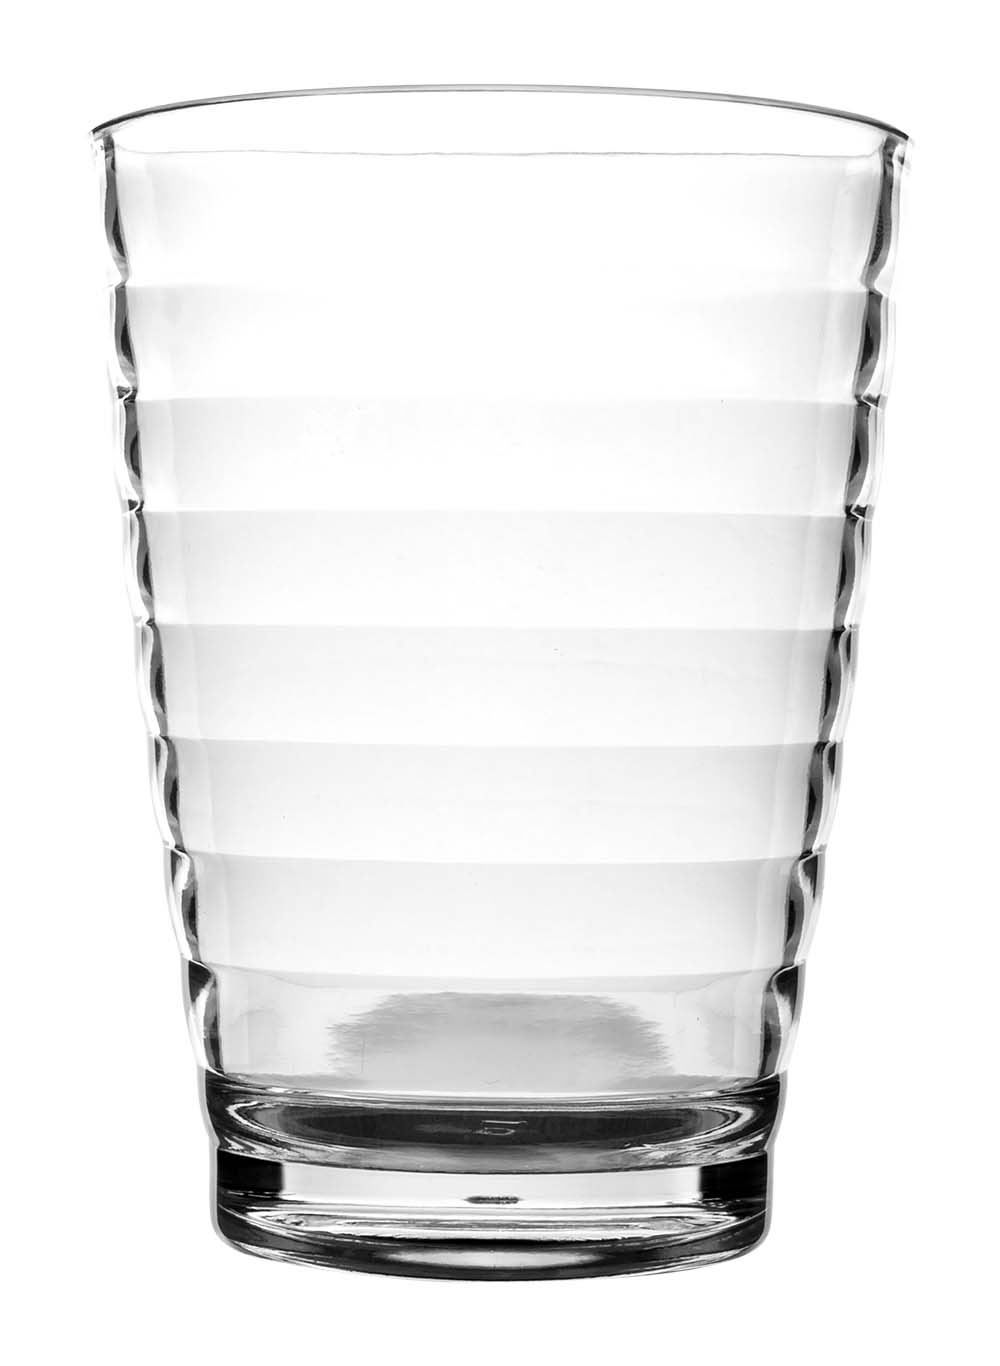 6101396 An extra firm and luxurious lemonade glass. Made of 100% polycarbonate. This makes the glass virtually unbreakable, lightweight and scratch resistant. This glass is also dishwasher safe. A set of 4 glasses.